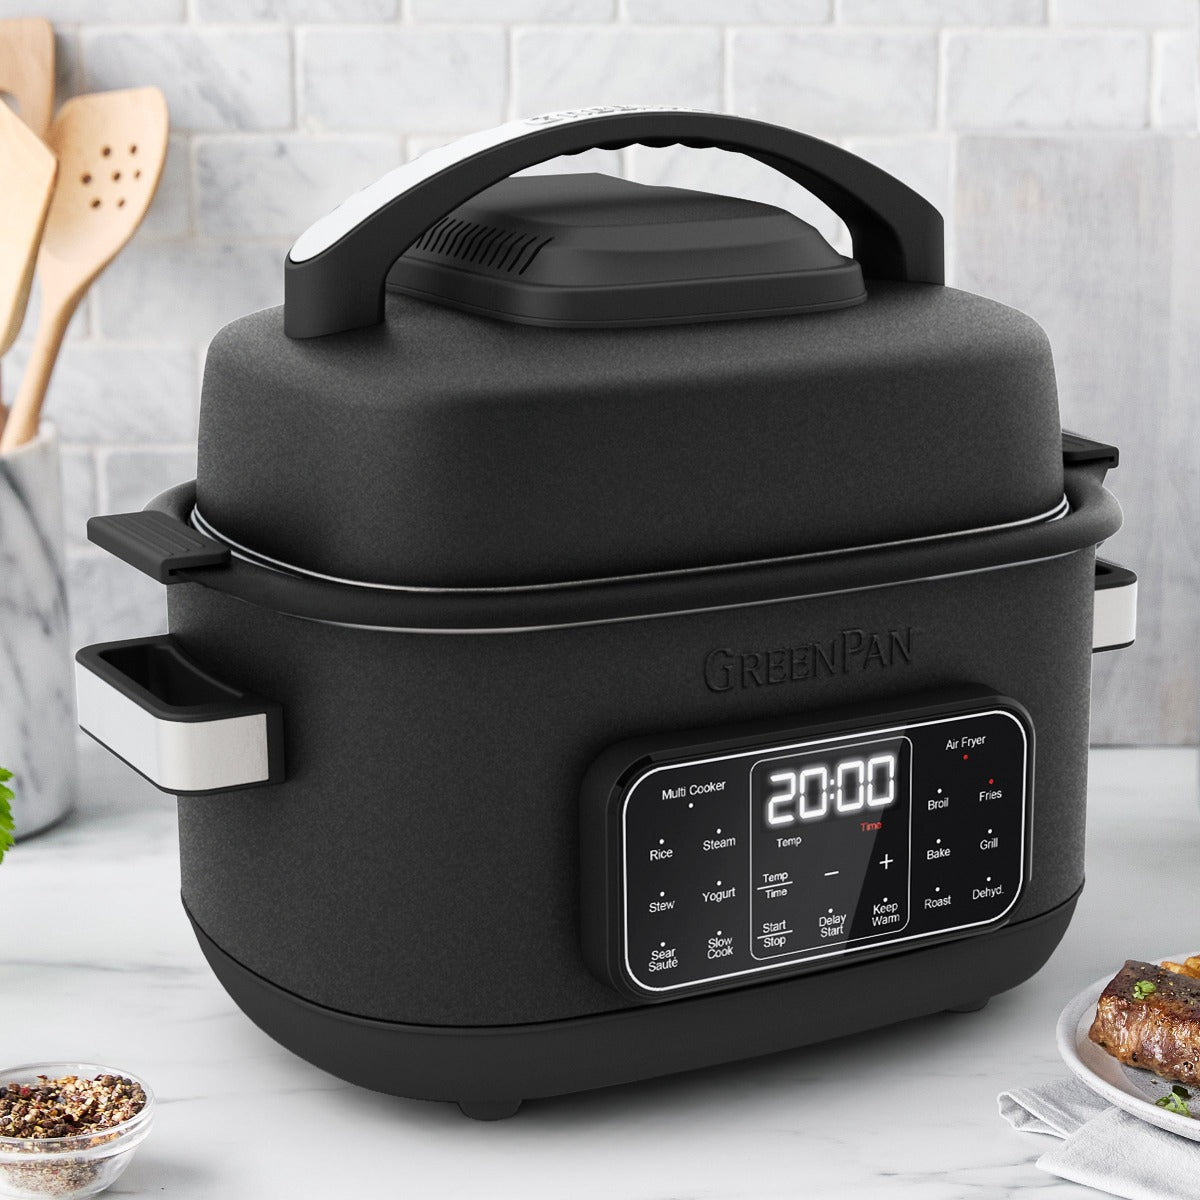  GreenPan Stainless Steel 13-in-1 Air Fryer Slow Cooker & Grill,  Presets to Steam Saute Broil Bake and Cook Rice, Healthy Ceramic Nonstick  and Dishwasher Safe Parts, Easy-to-use LED Display,Silver: Home 